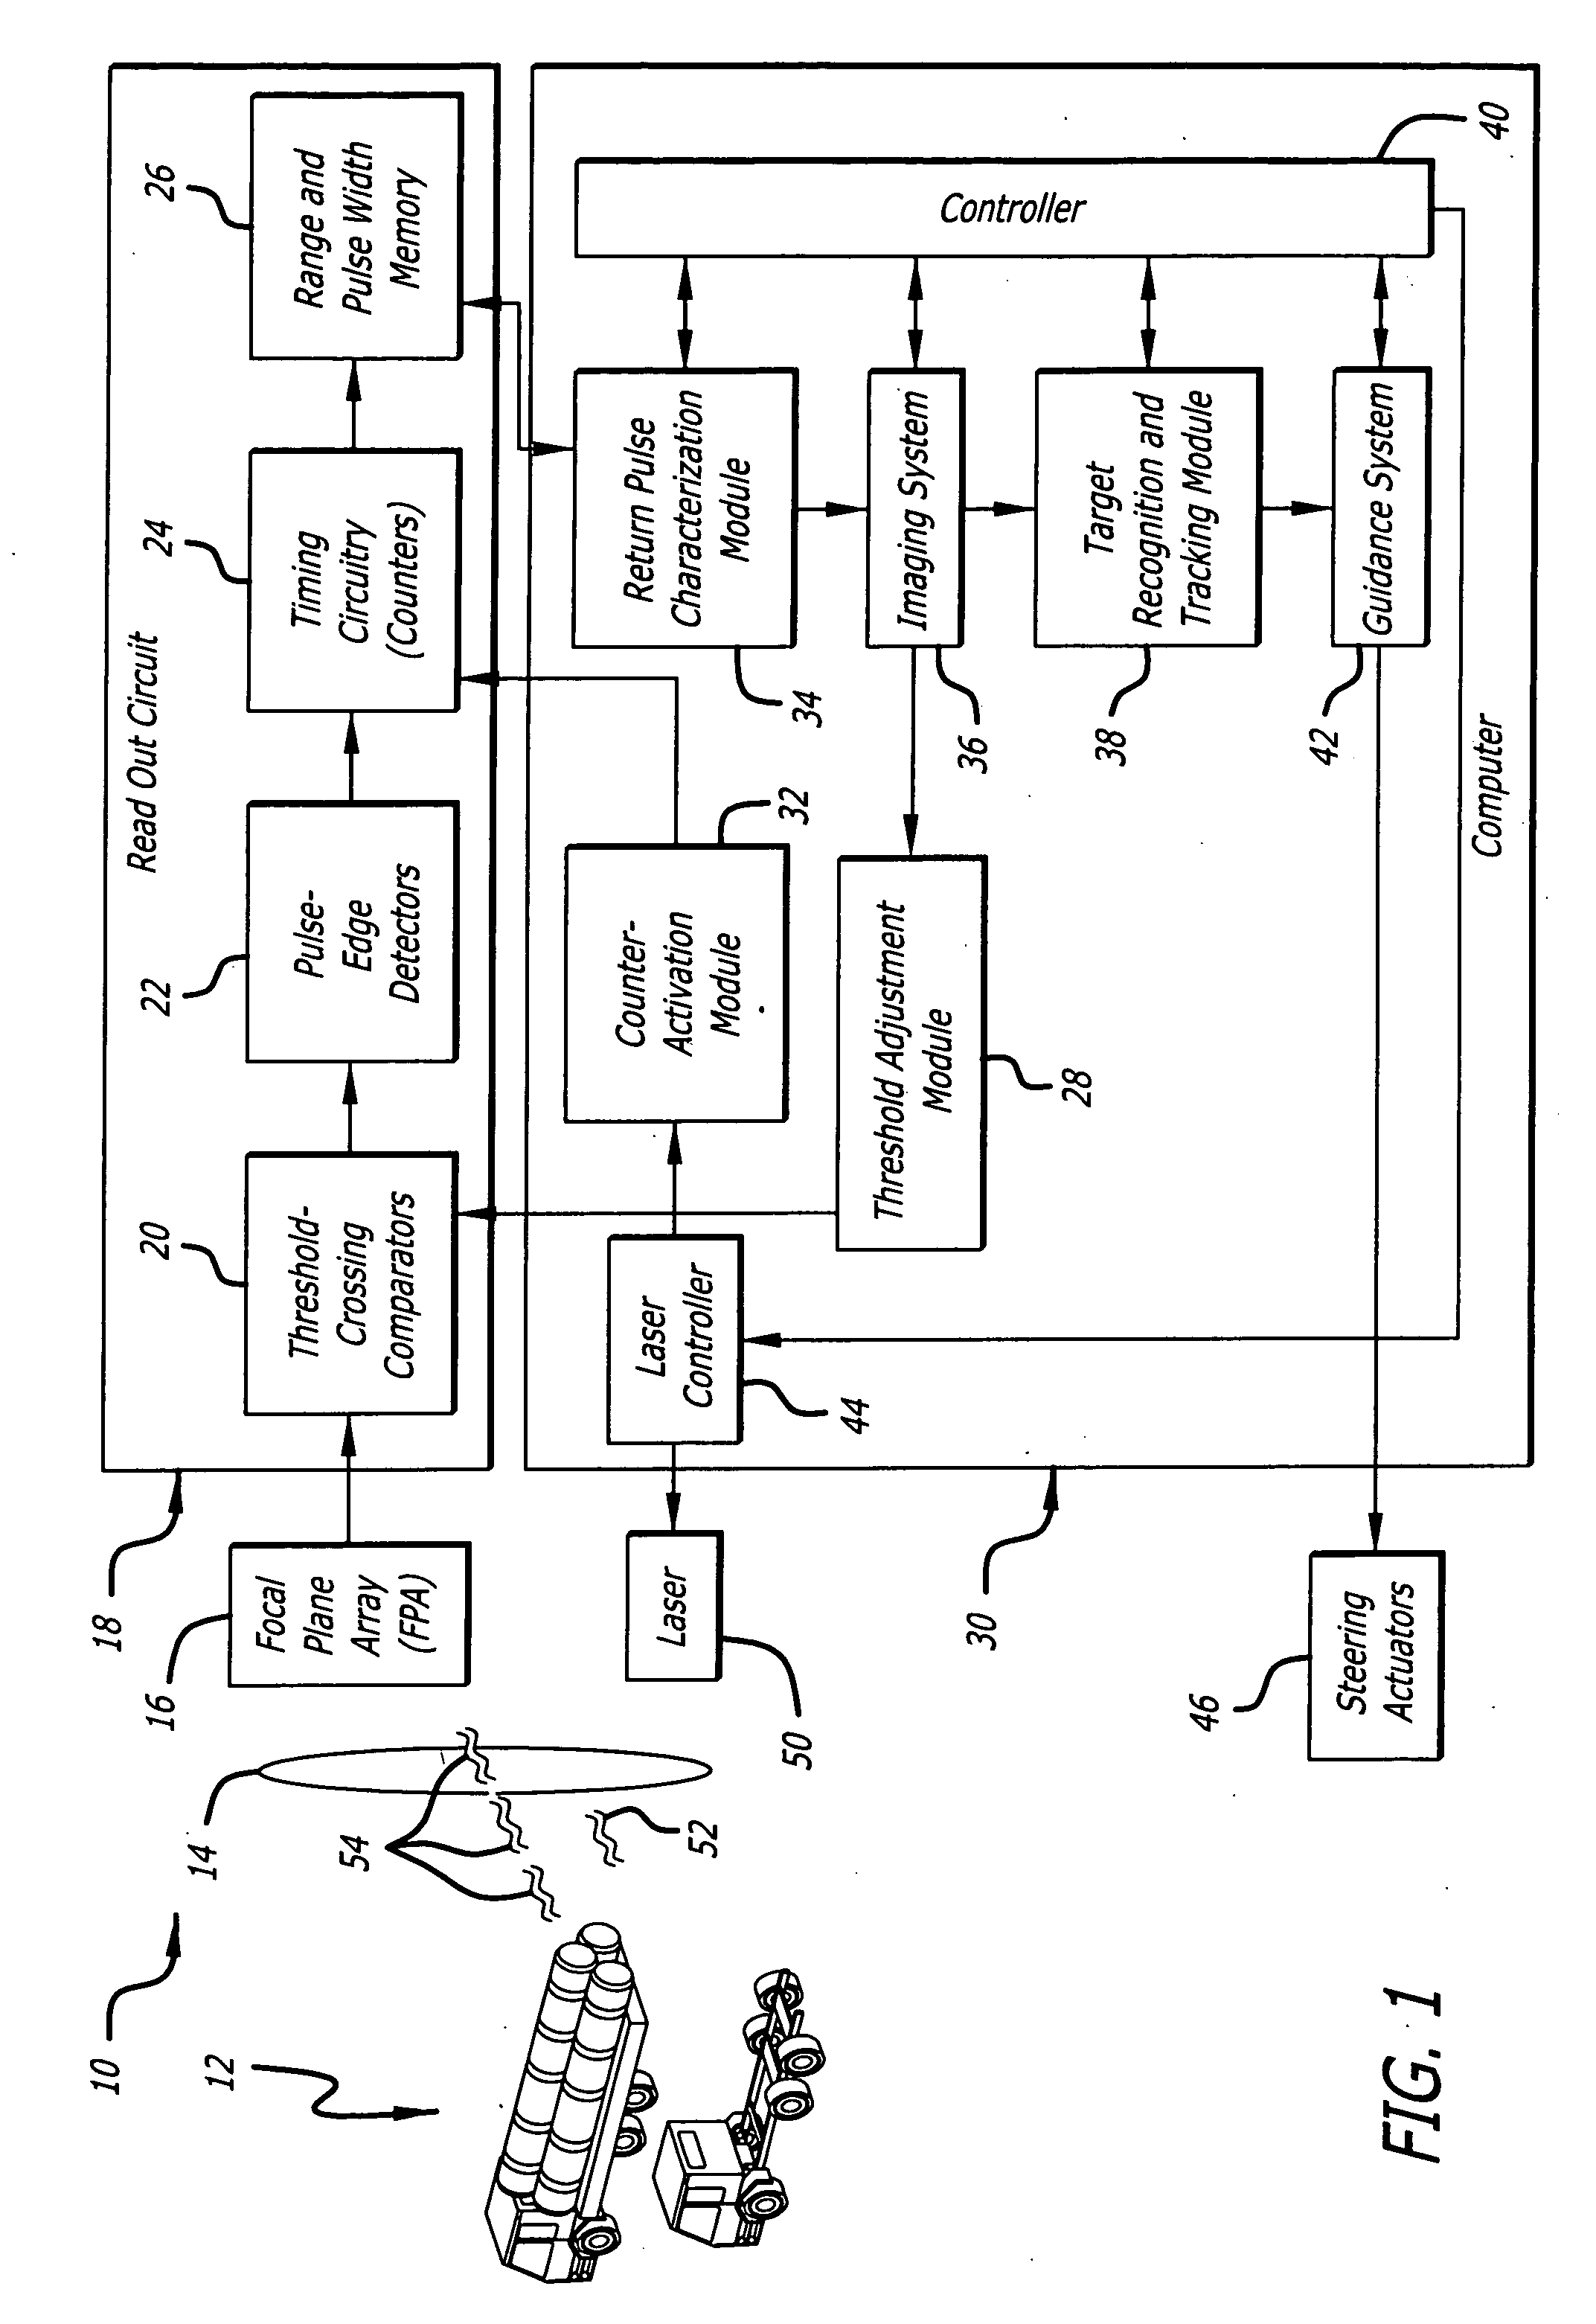 High-speed readout circuit and system incorporating same